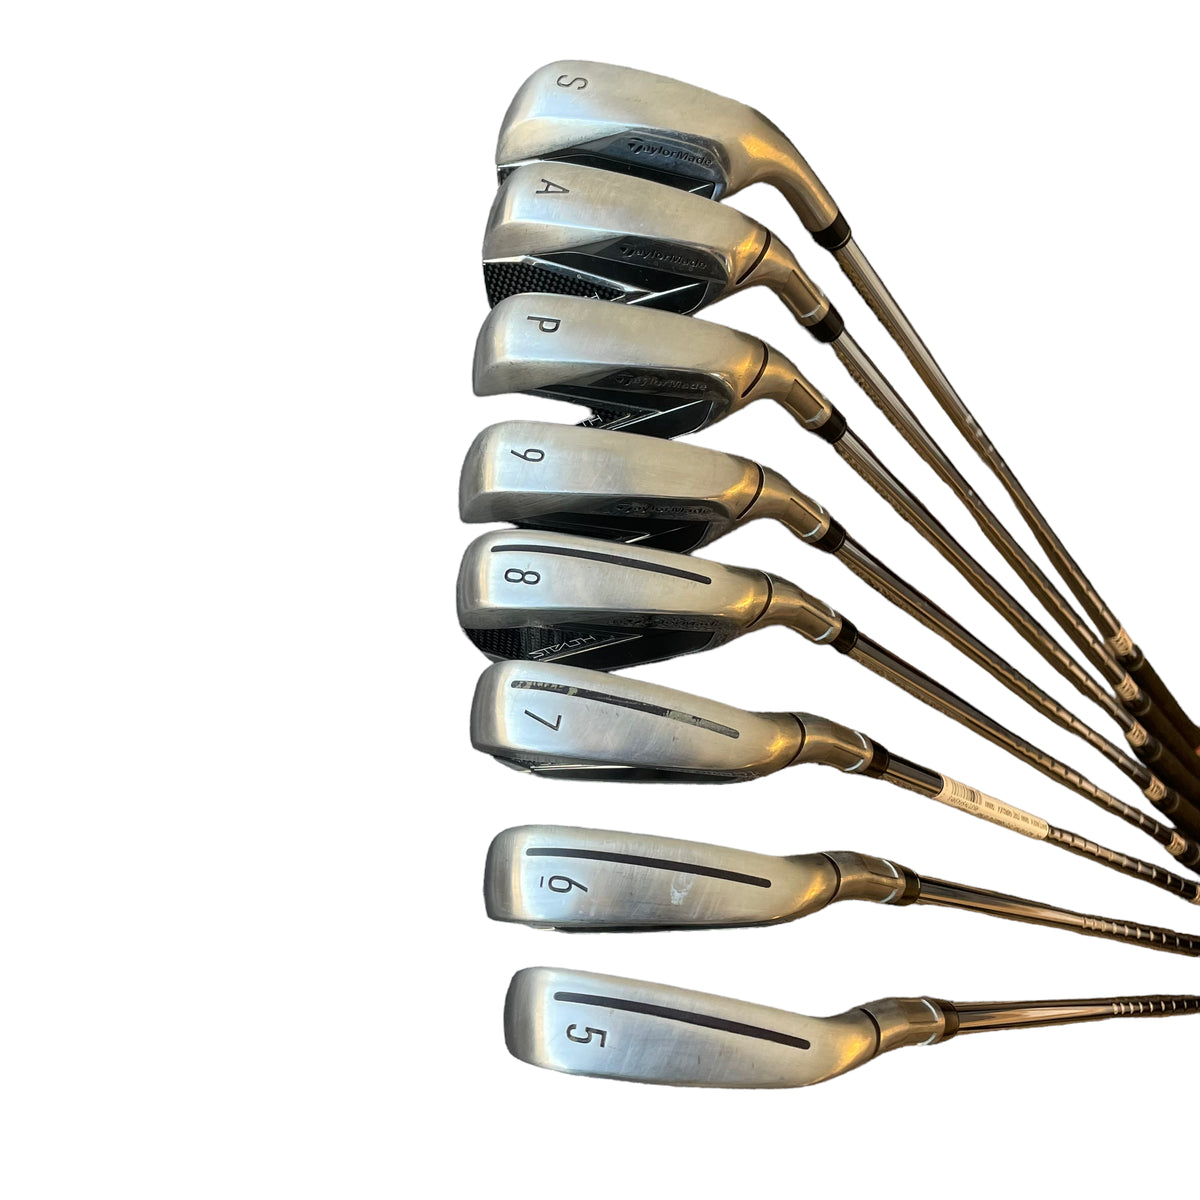 TaylorMade Stealth Iron Set - 5-PW, AW, SW - Steel - Used Iron set Taylormade   